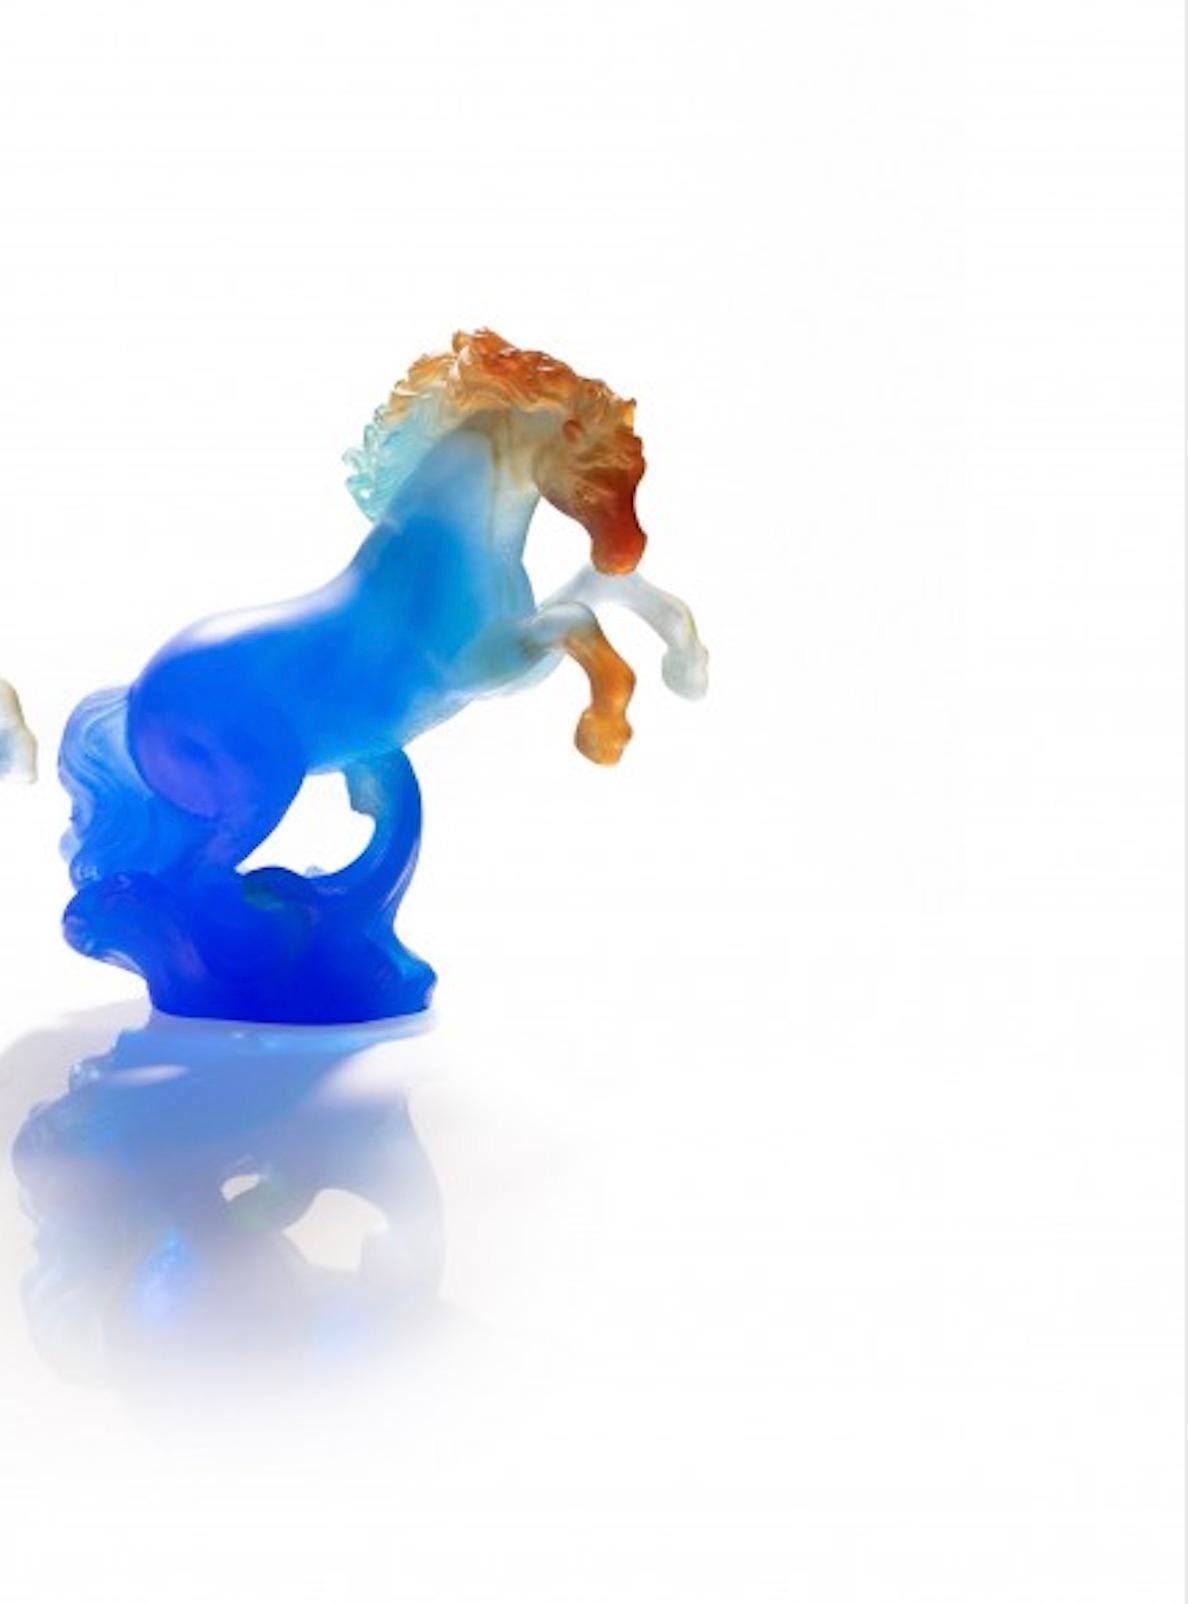 Cabred horses Daum France
MARLY Collection
Molded glass paste pressed and tinted royal blue and amber
Signed 